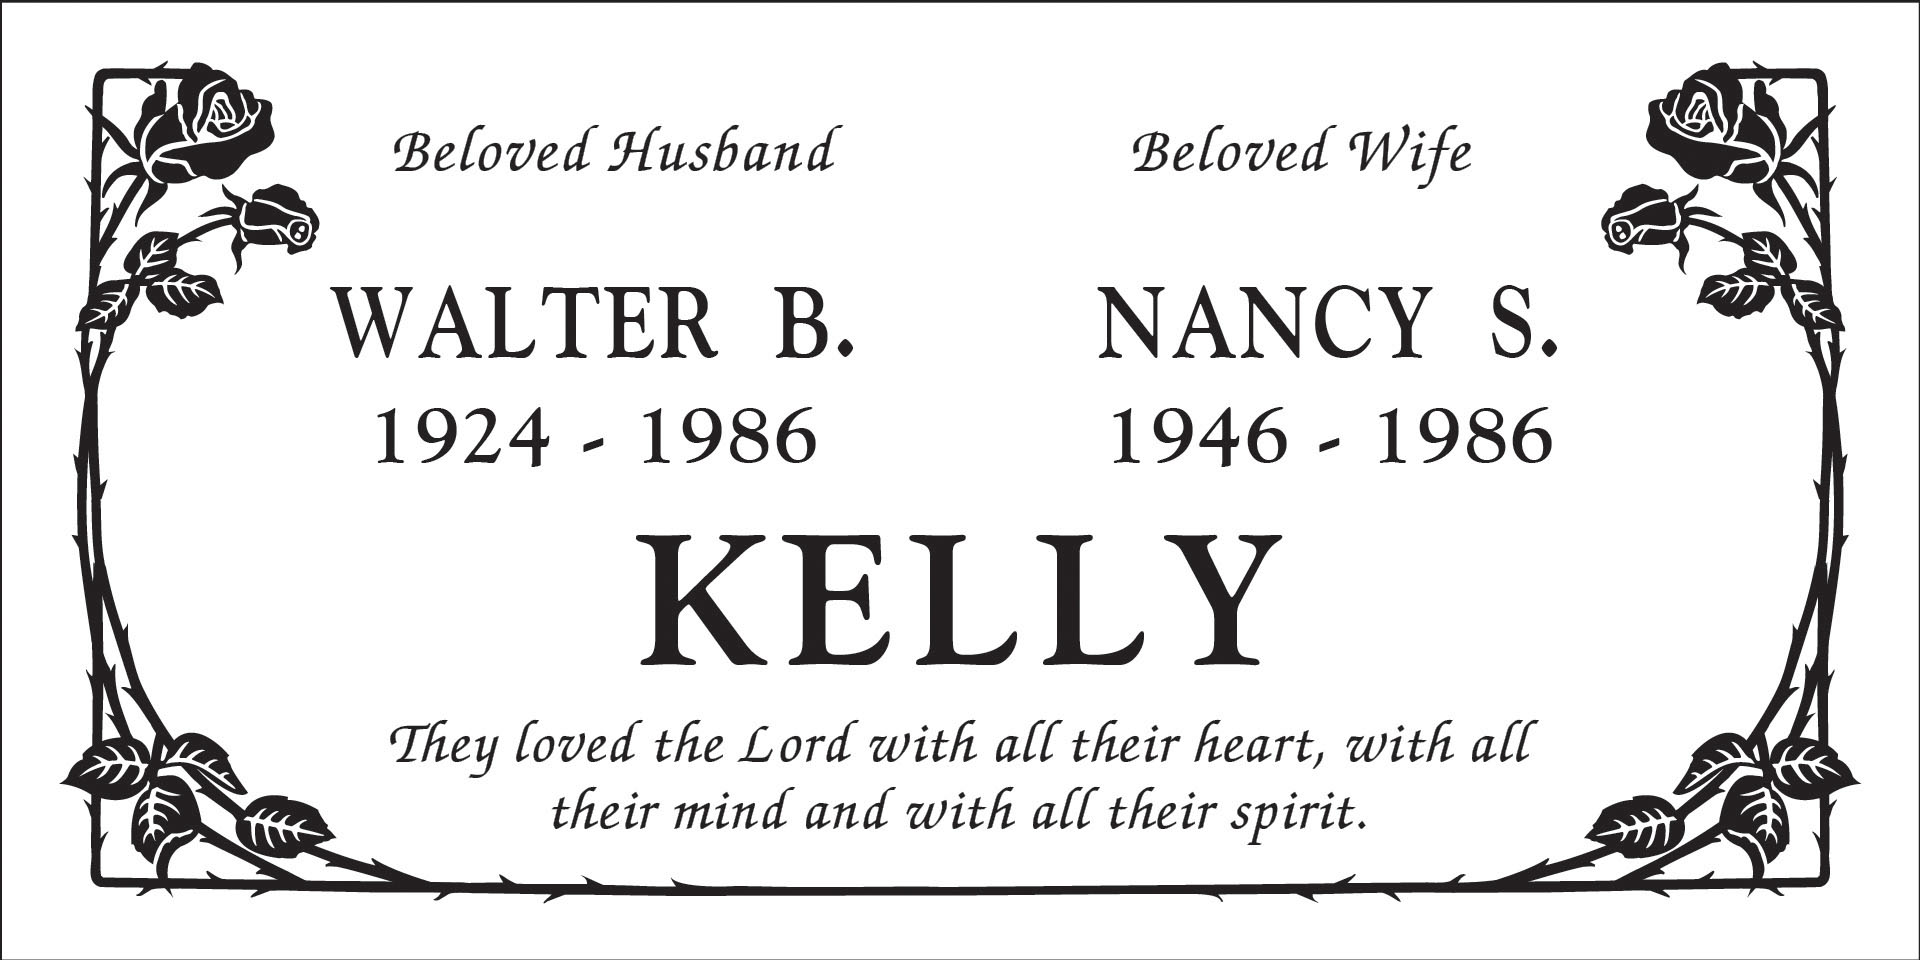 Headstone Border Designs Printable Form Templates and Letter